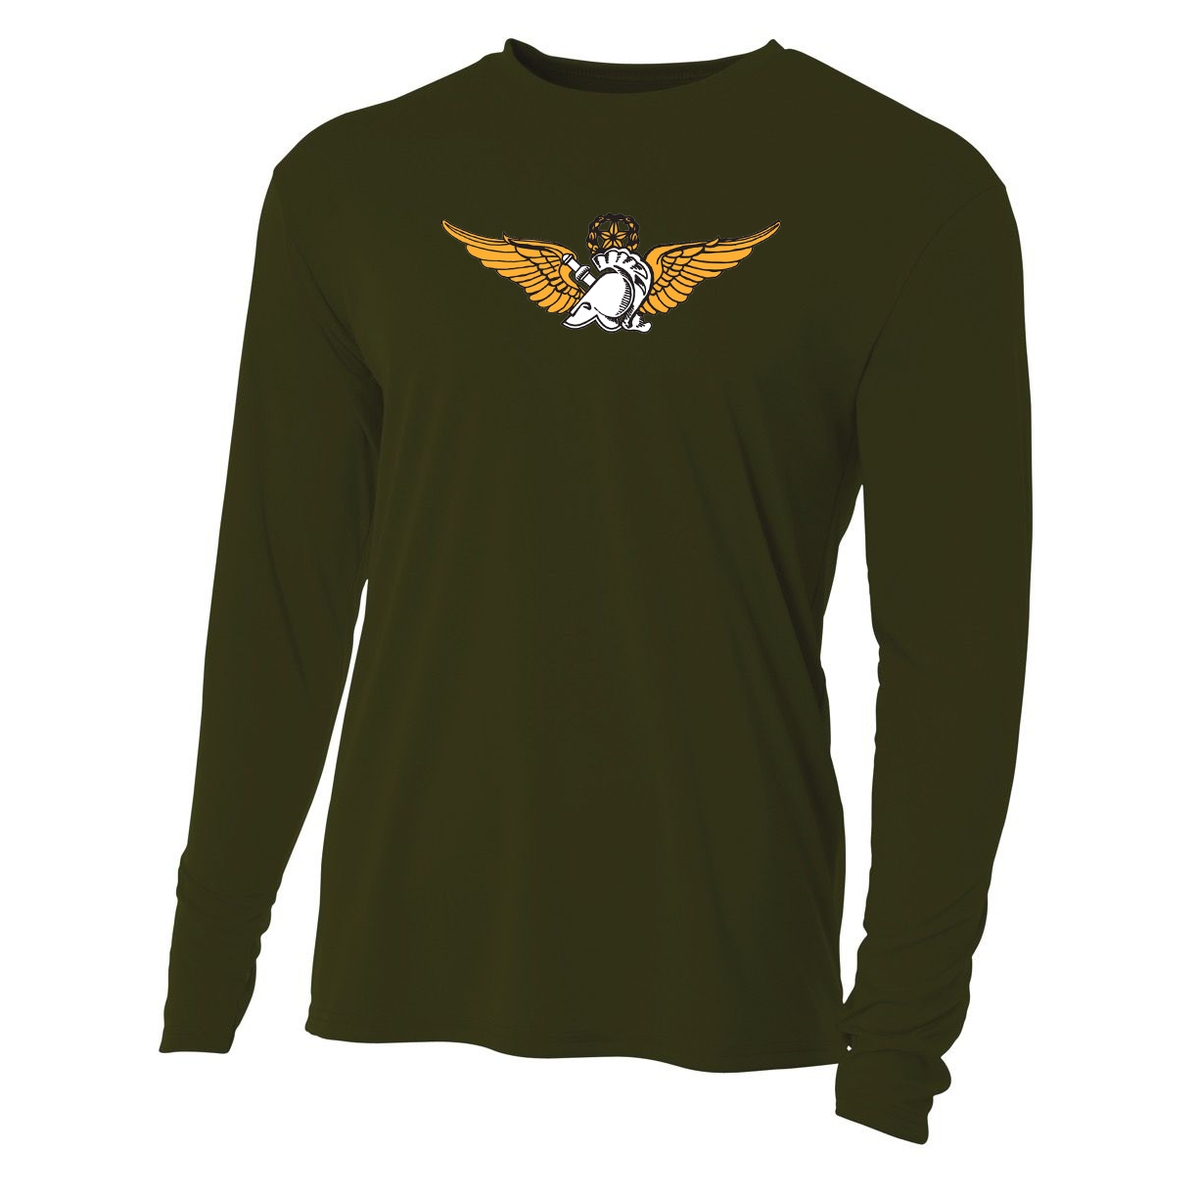 West Point Flight Team Cooling Performance Long Sleeve Crew